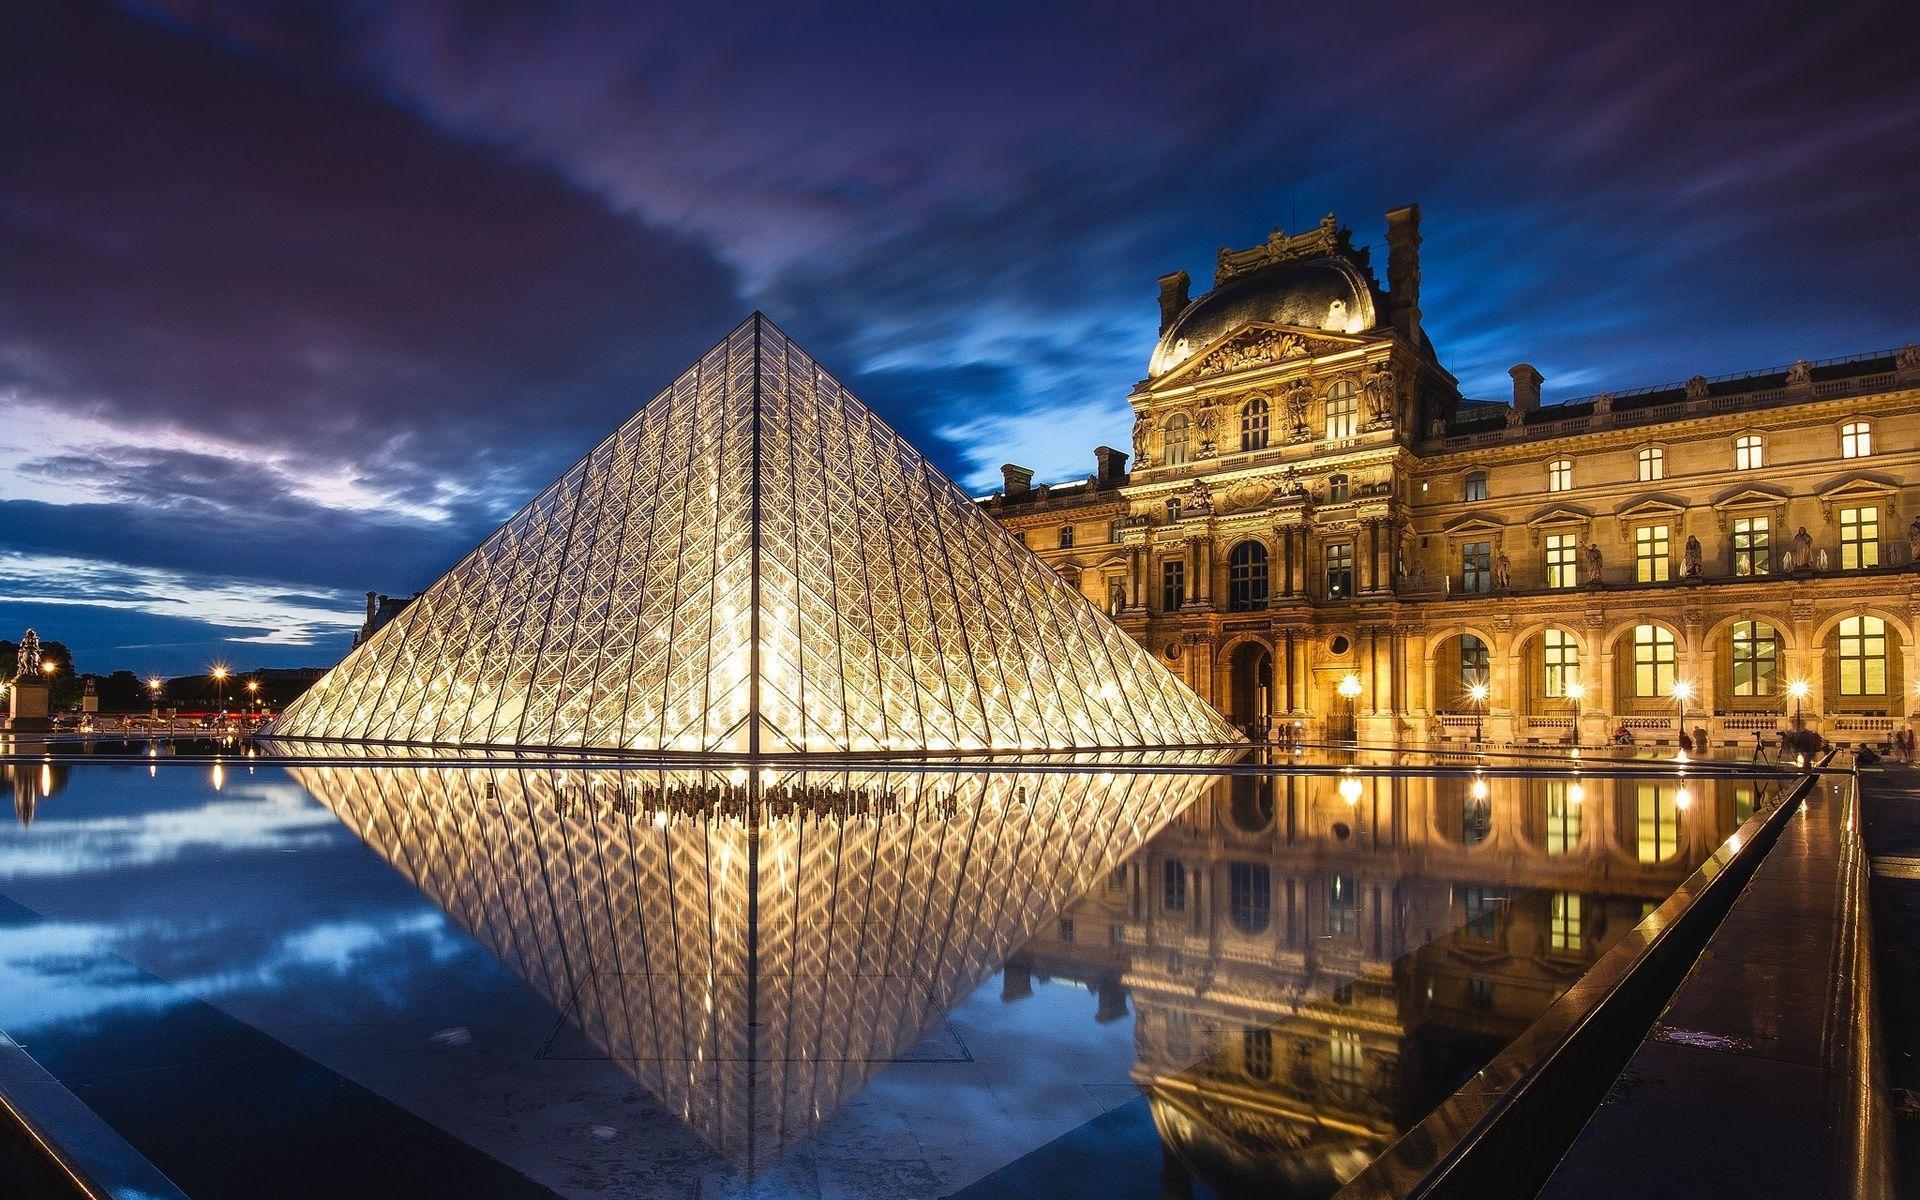 Louvre Gallery of Wallpaper. Free Download For Android